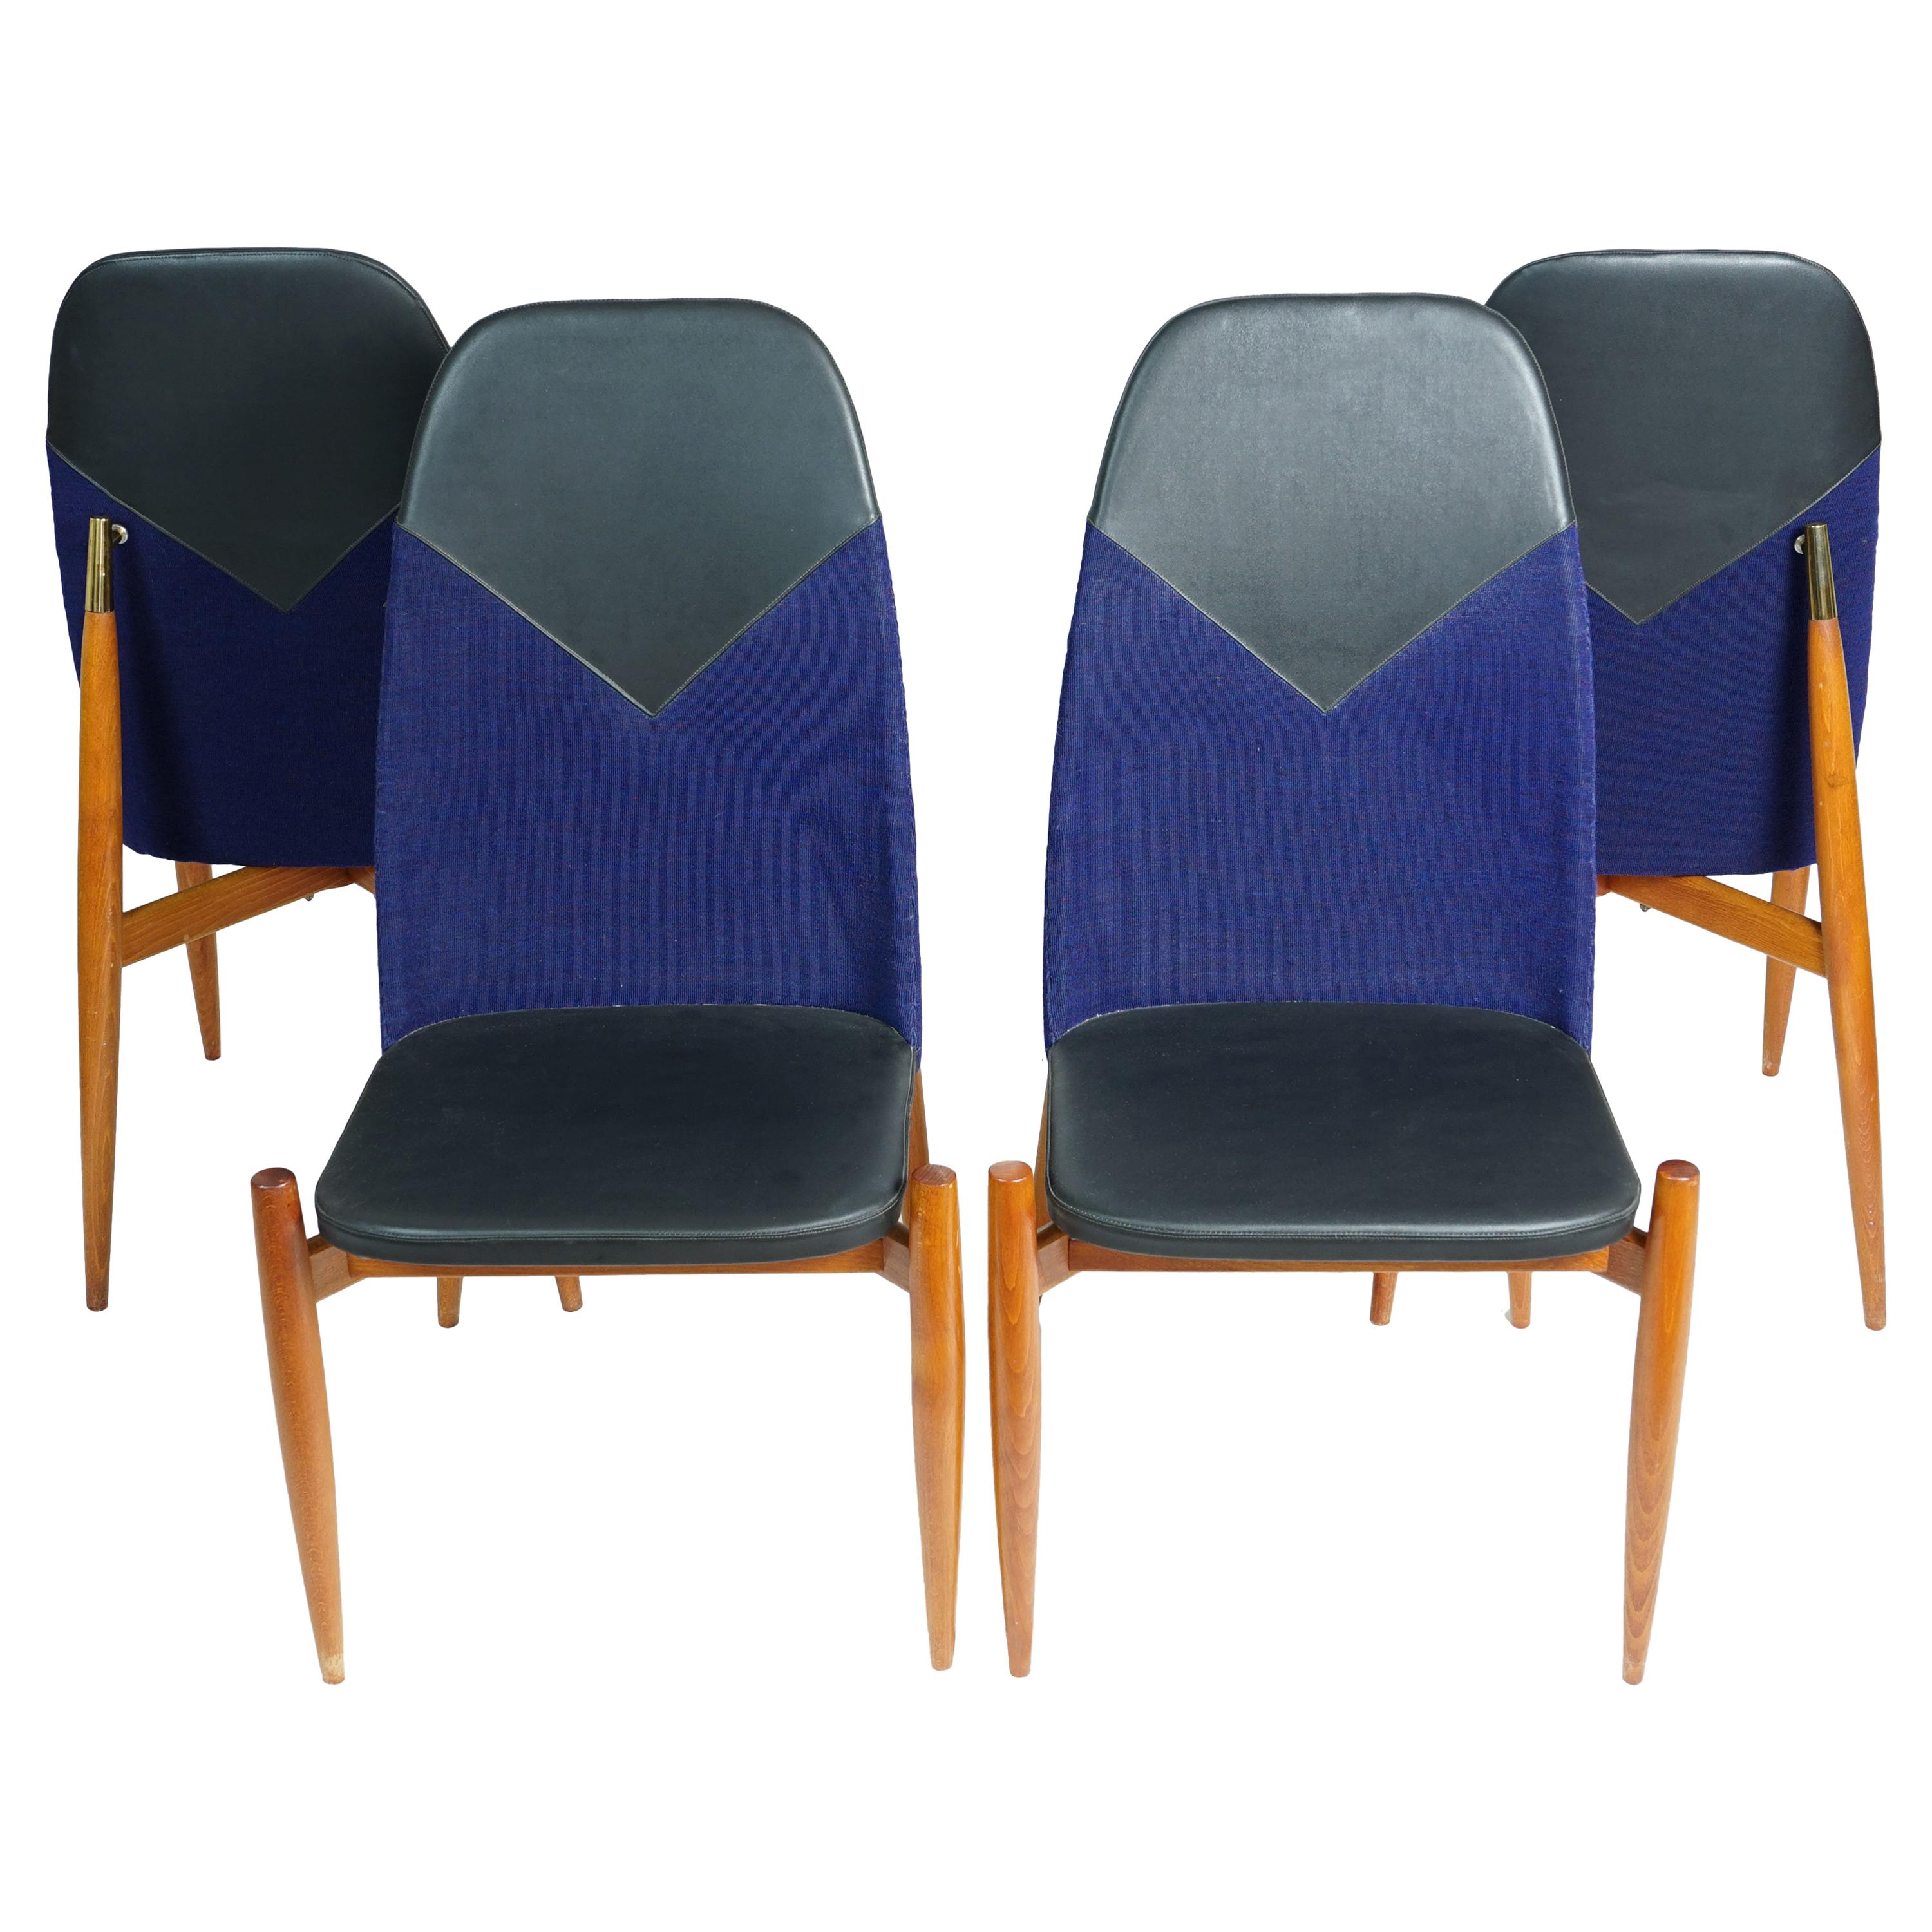 Midcentury Dining Chairs from Miroslav Navratil For Sale